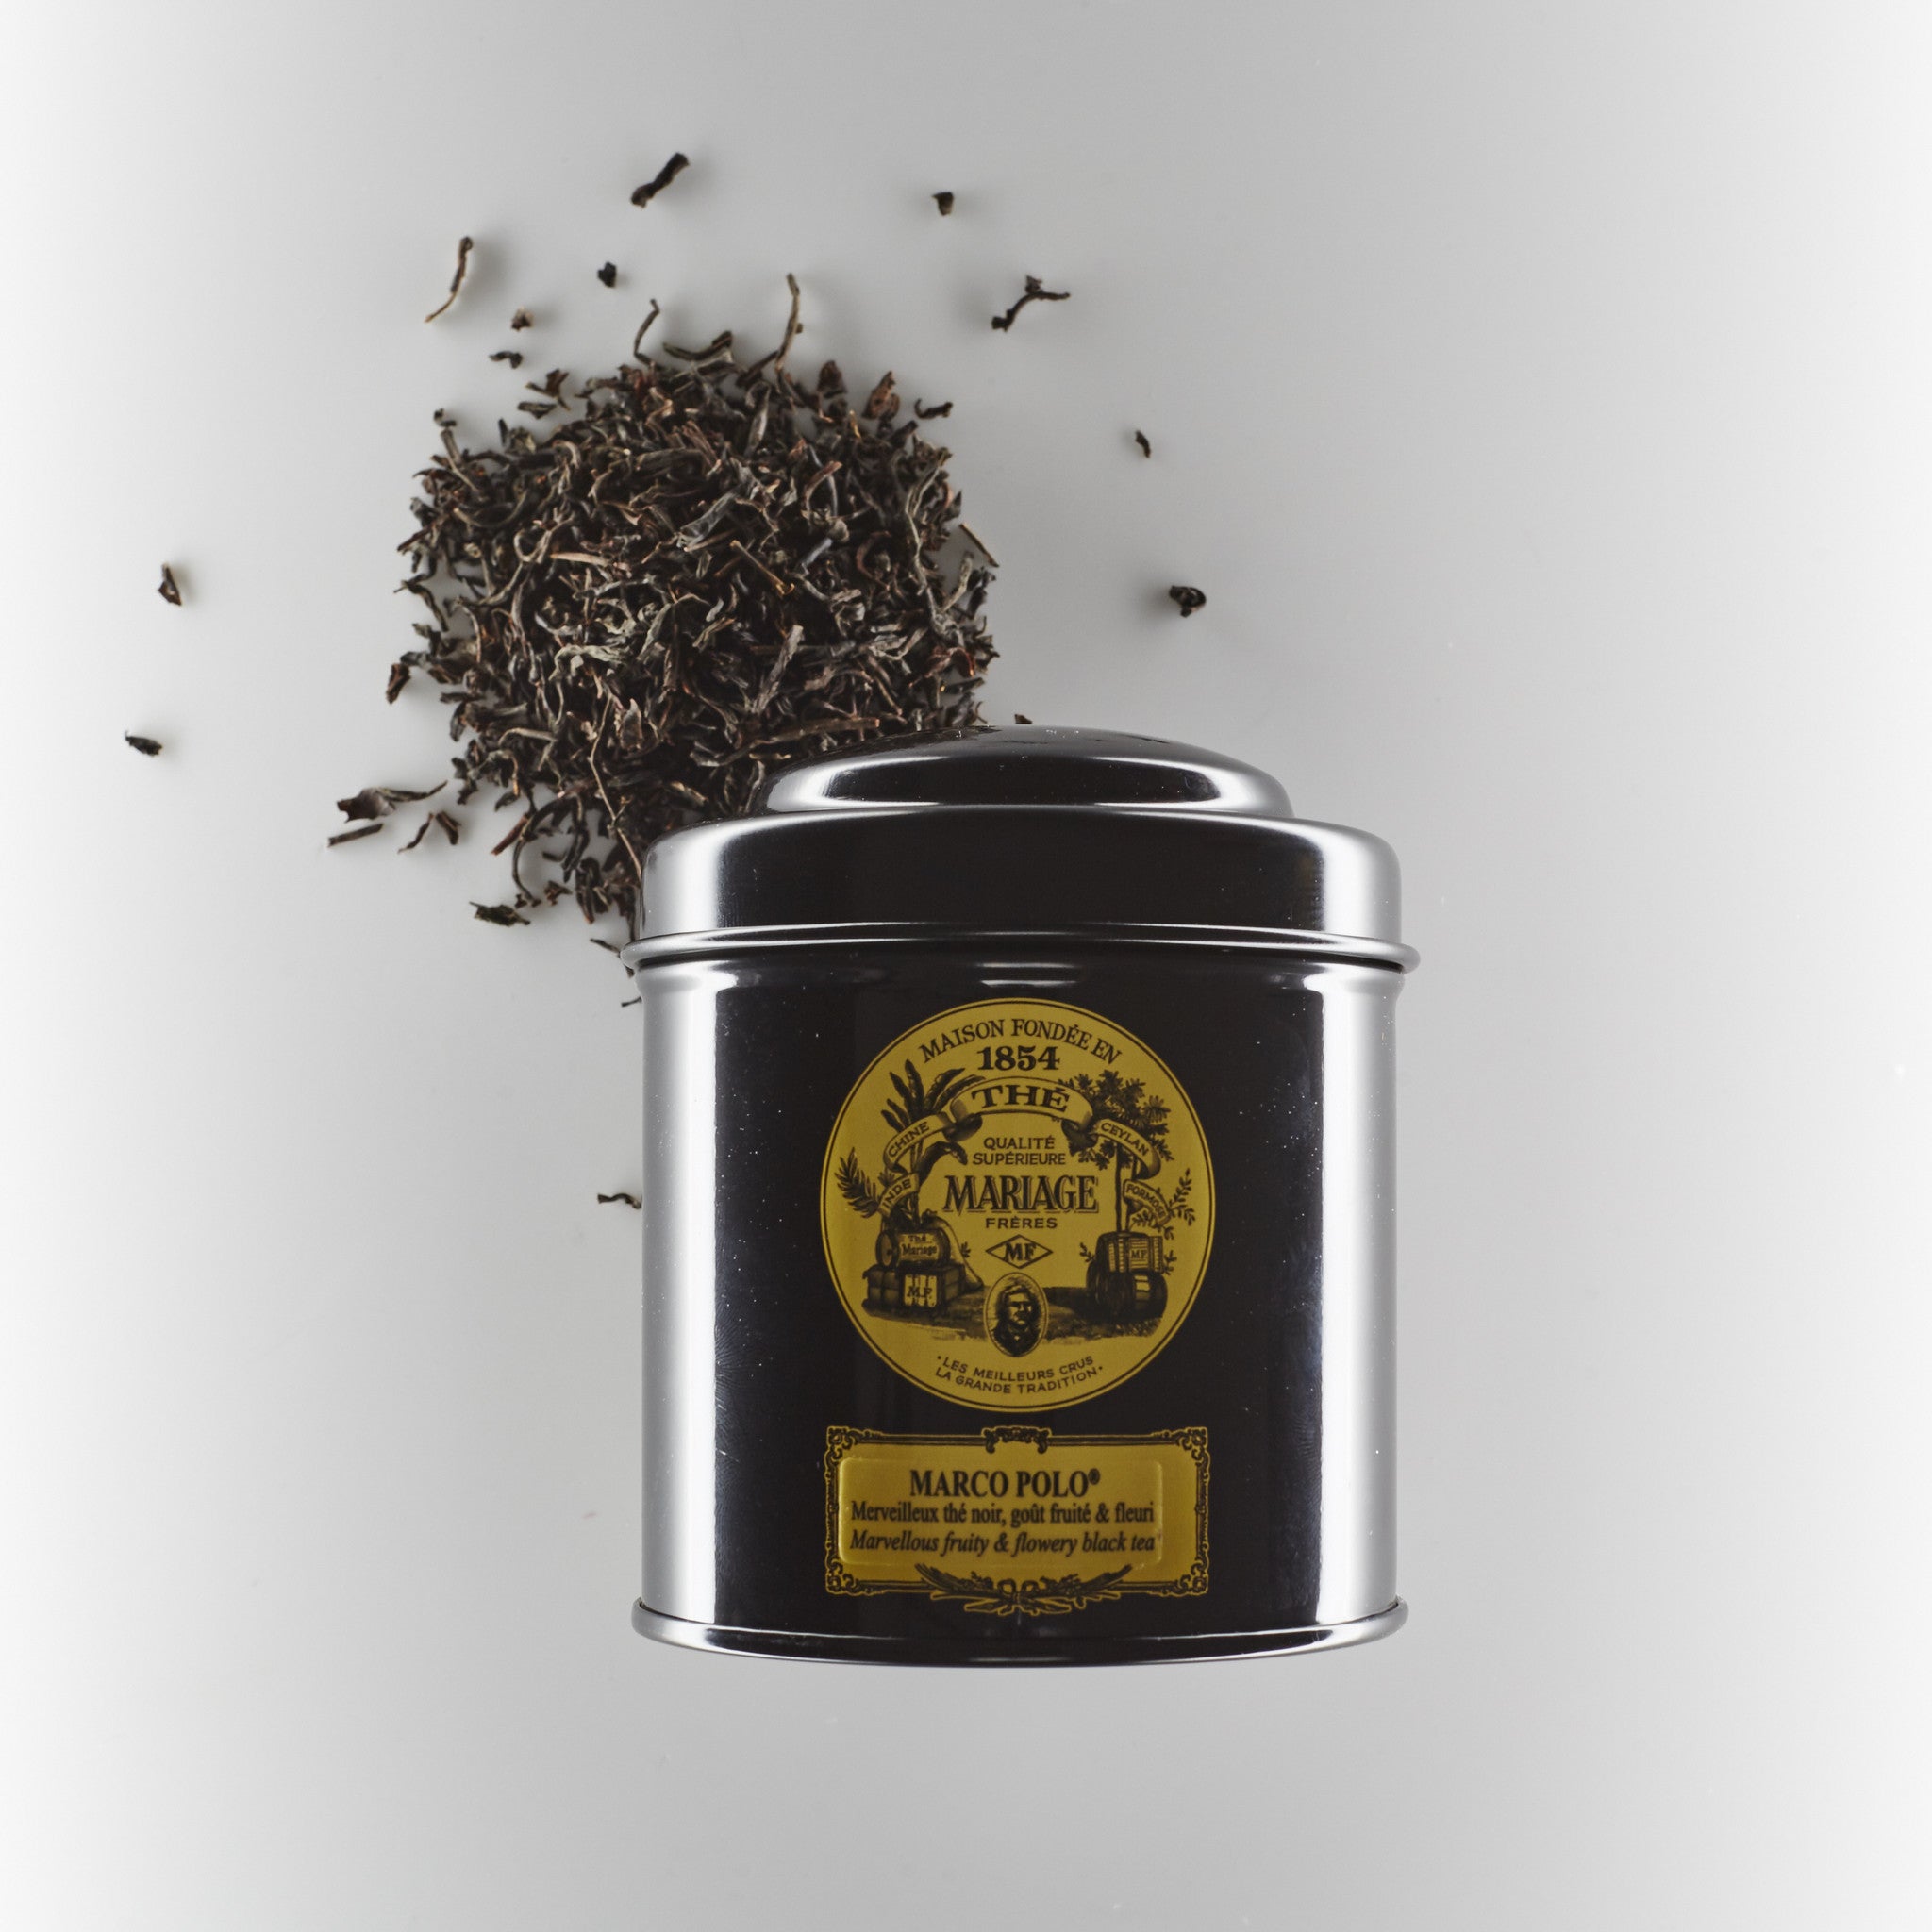 Mariage Frères canister of Marco Polo loose leaf tea